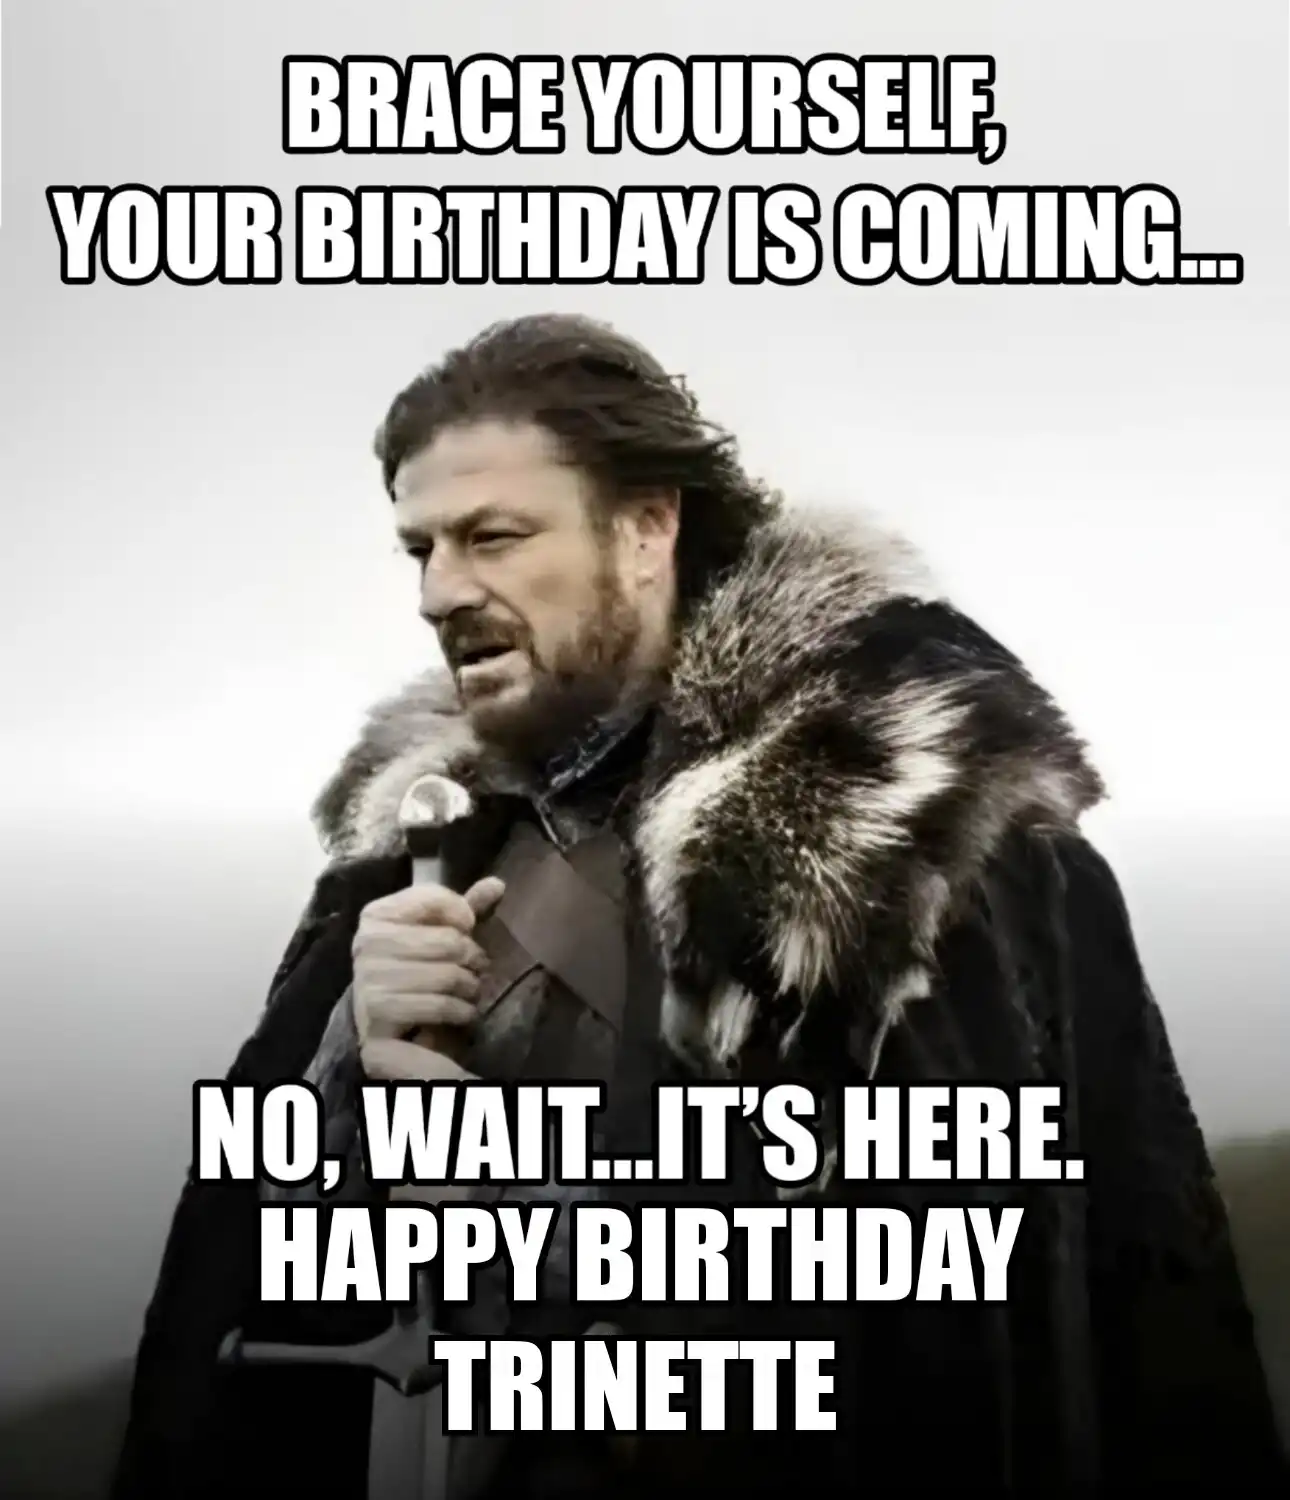 Happy Birthday Trinette Brace Yourself Your Birthday Is Coming Meme